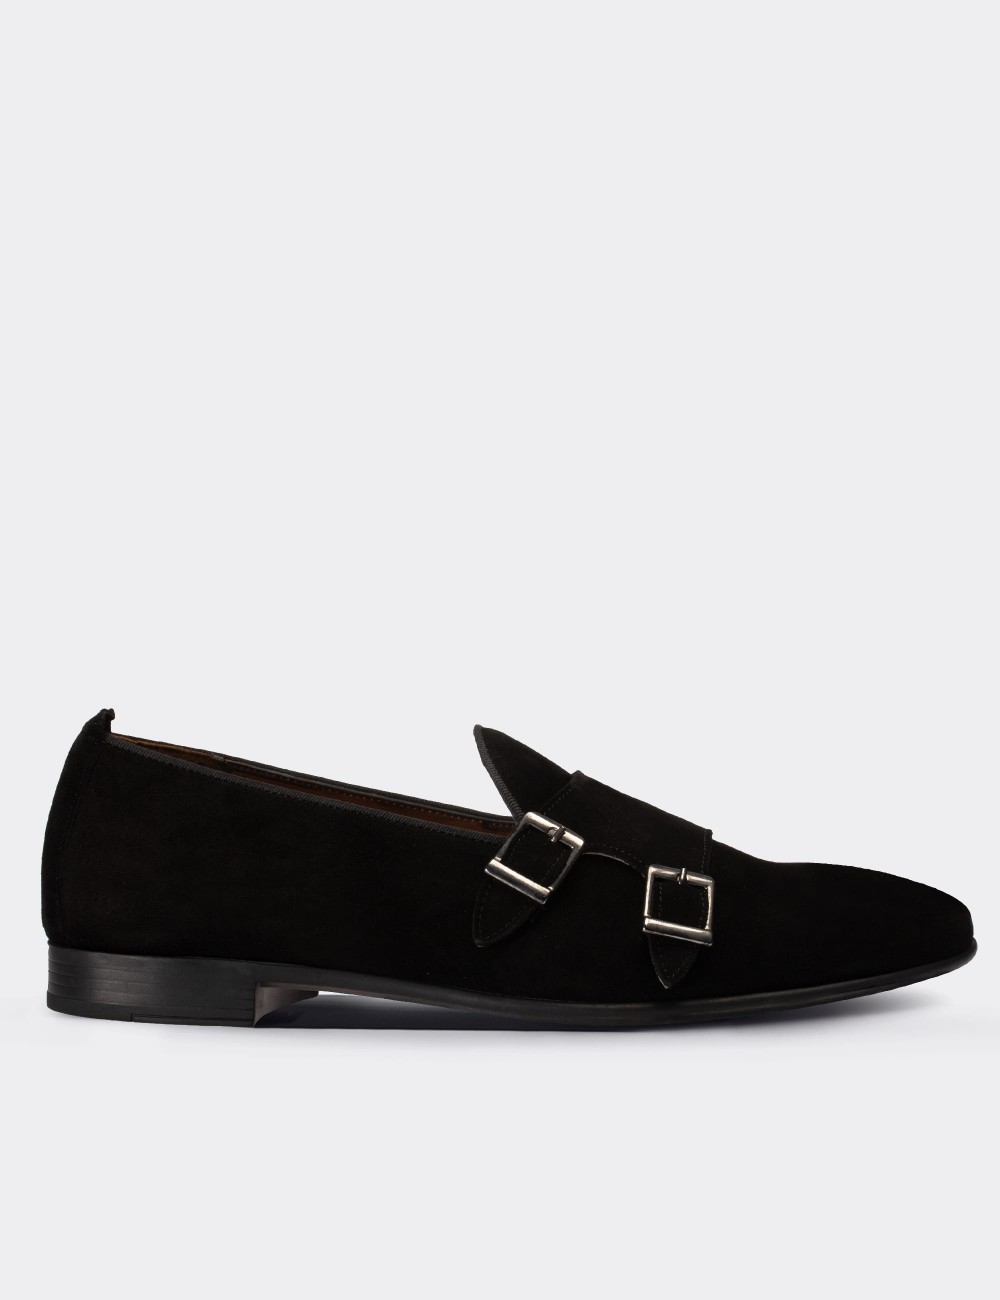 Black Suede Leather Loafers - 01705MSYHC04